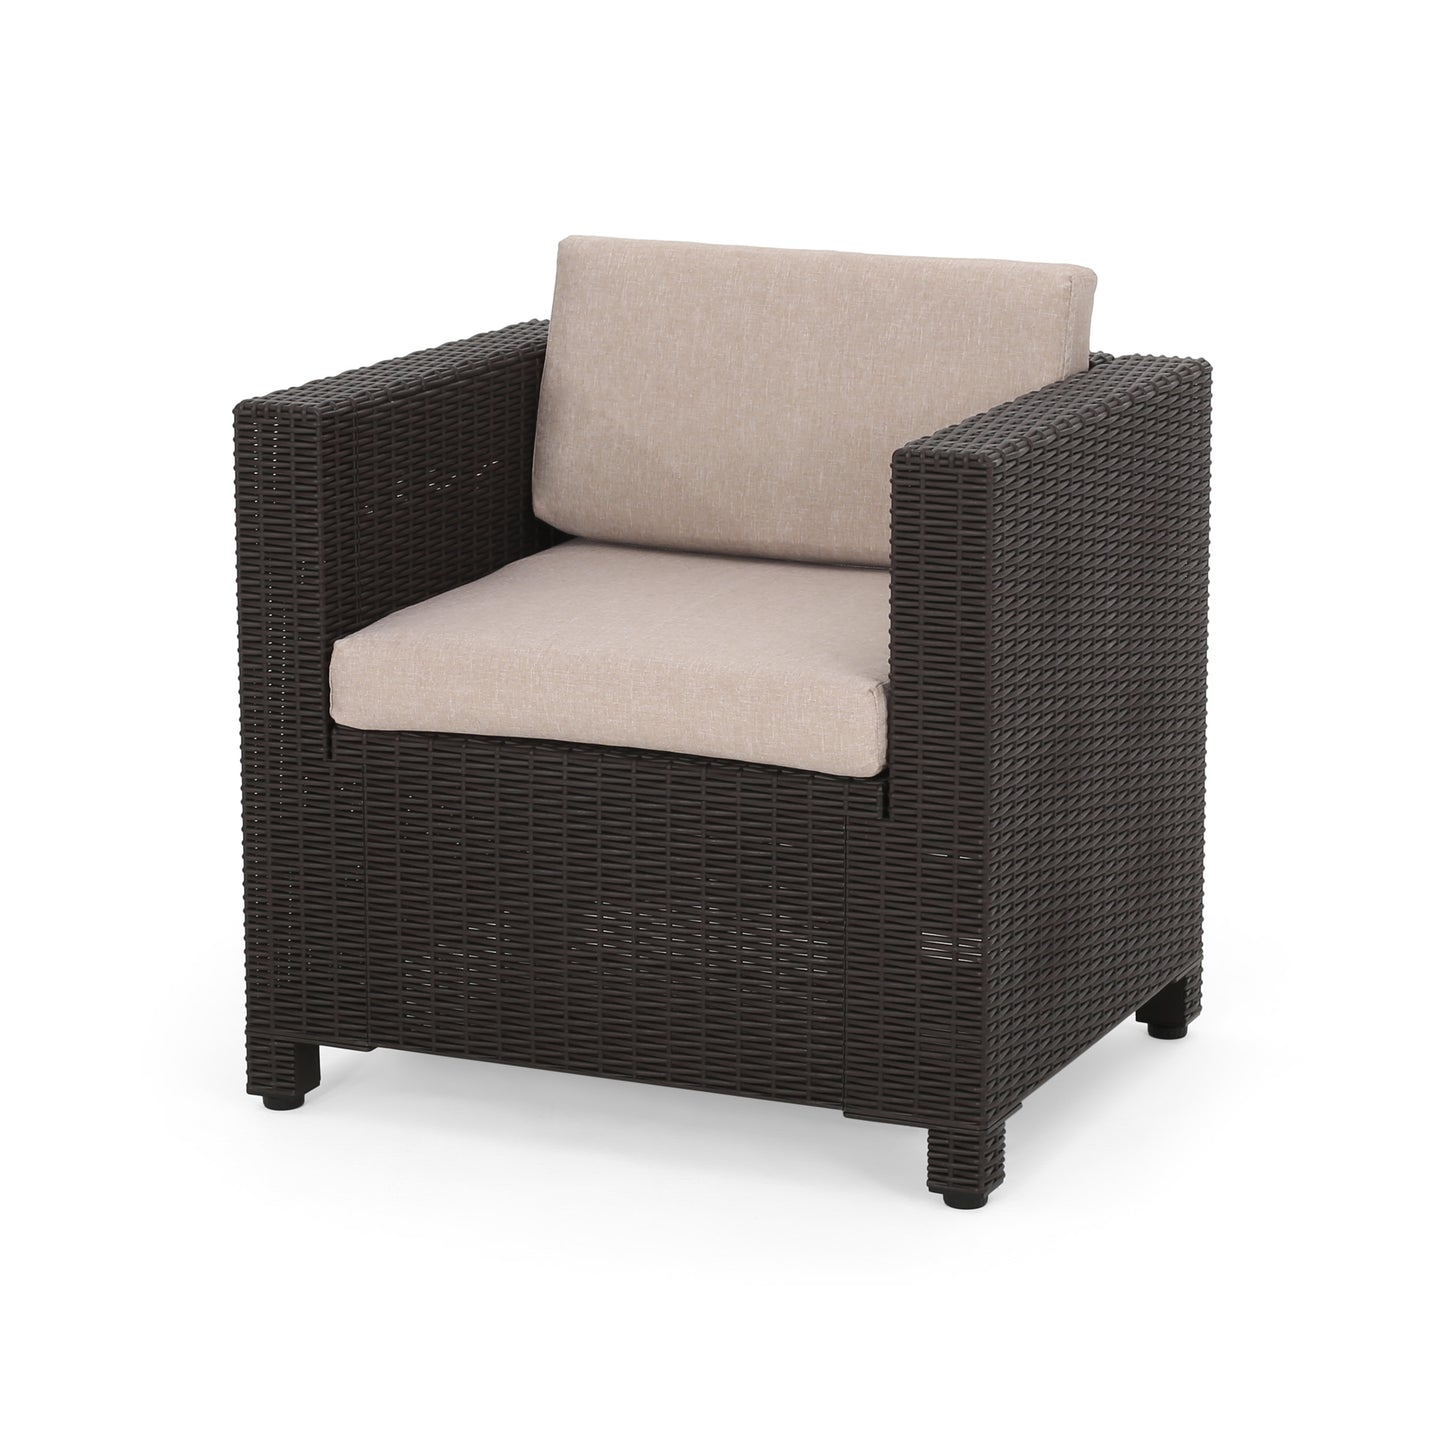 Ethan Outdoor Faux Wicker Club Chairs with Cushions